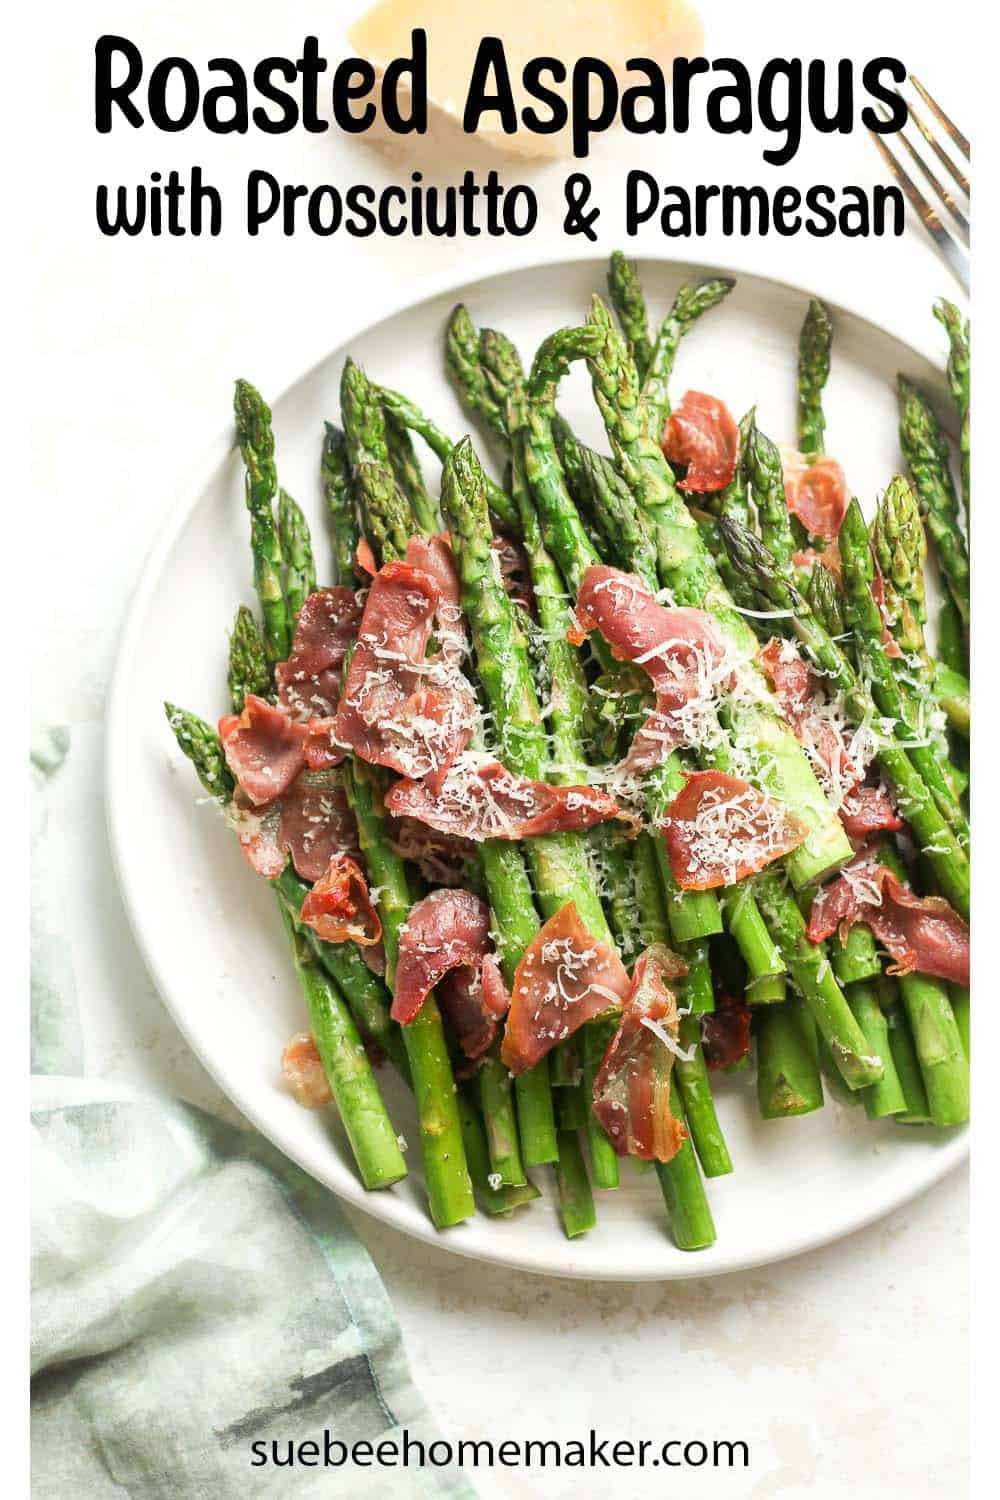 A plate of roasted asparagus with prosciutto and parmesan cheese.